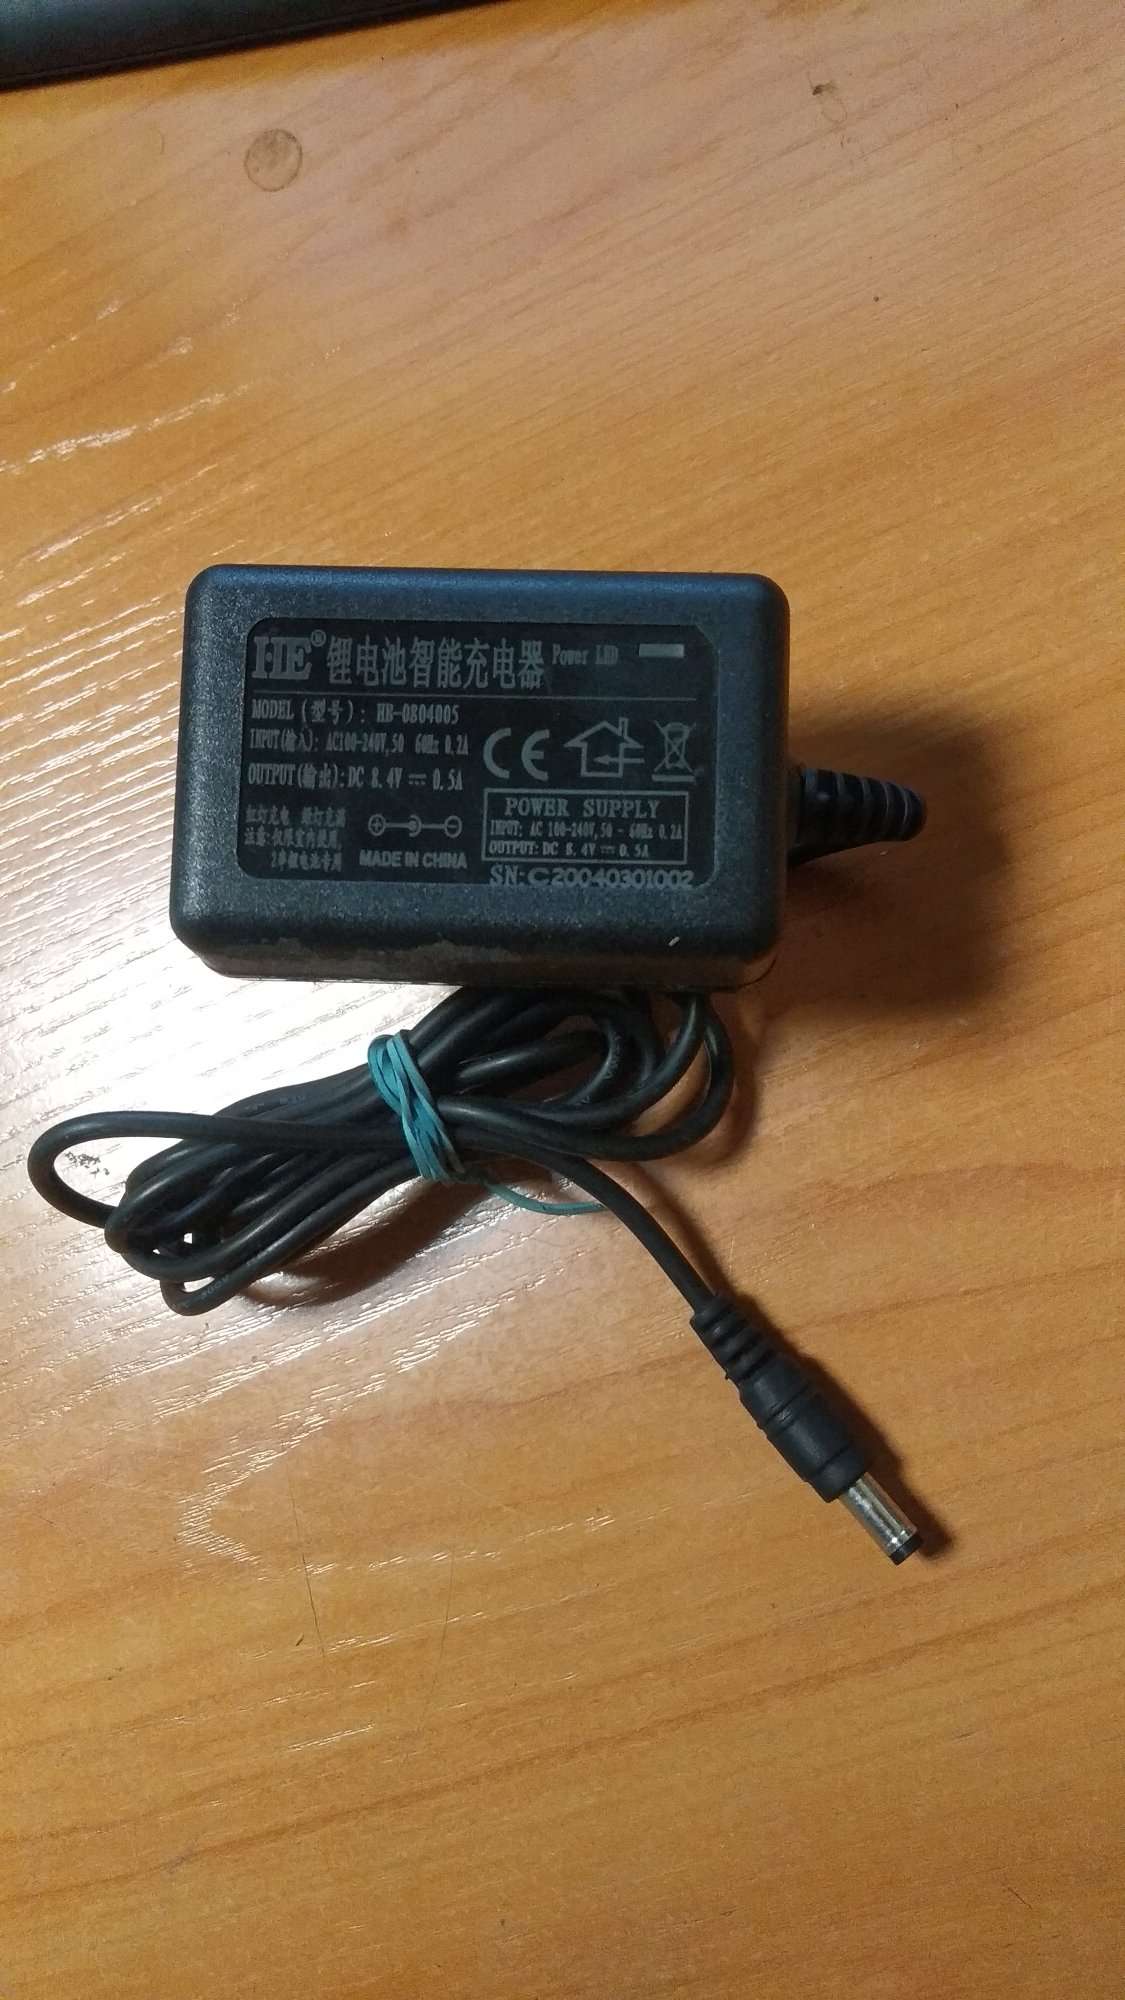   HB-0804005   
CW 8,4V/0,5A (Charger) 